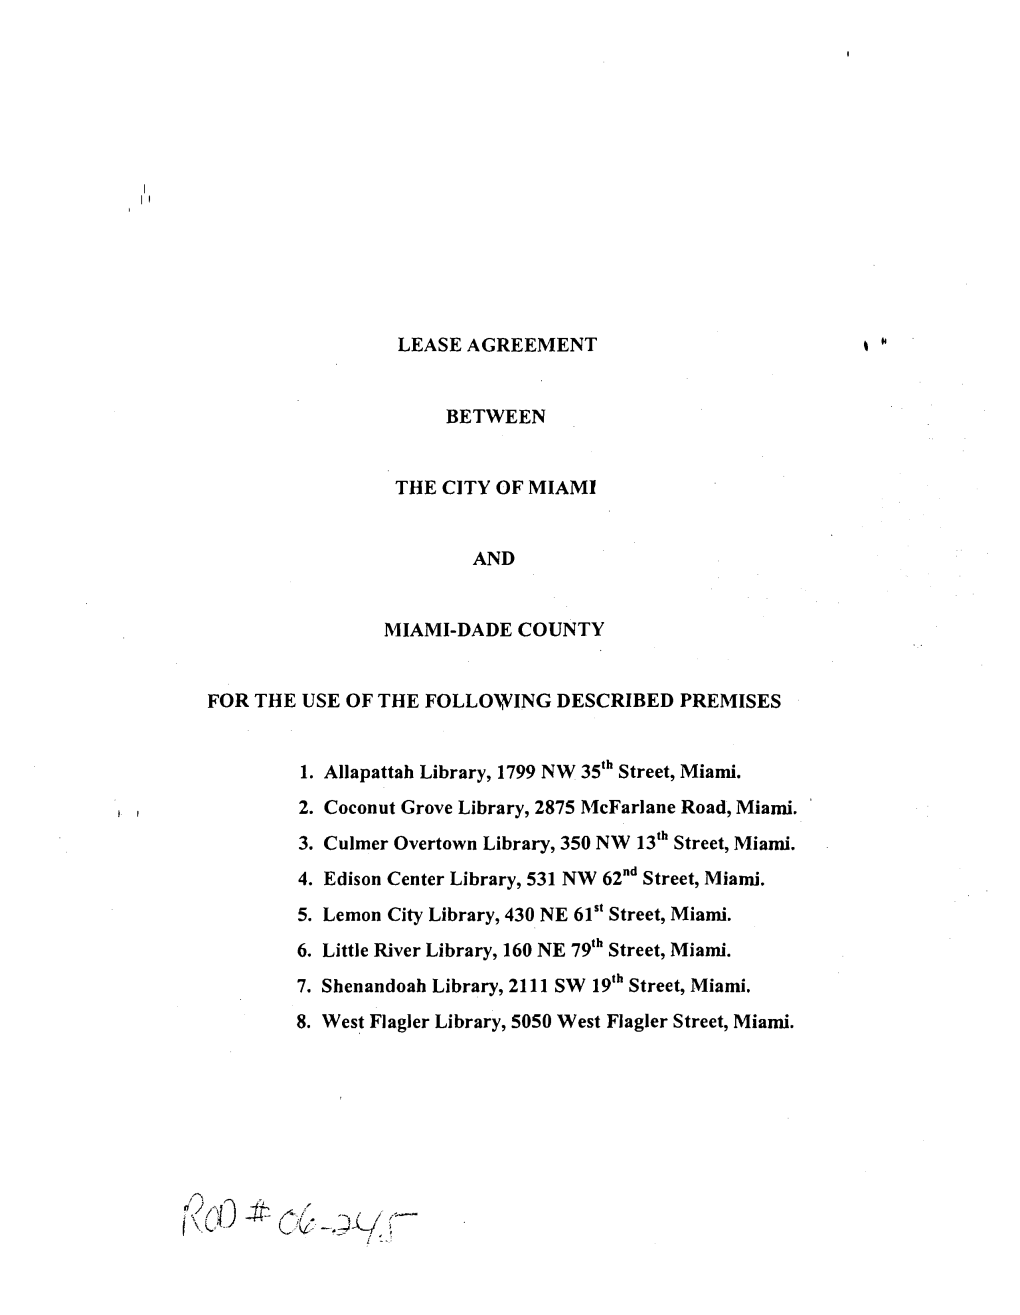 LEASE AGREEMENT BETWEEN the CITY of Miaml and MIAMI-DADE